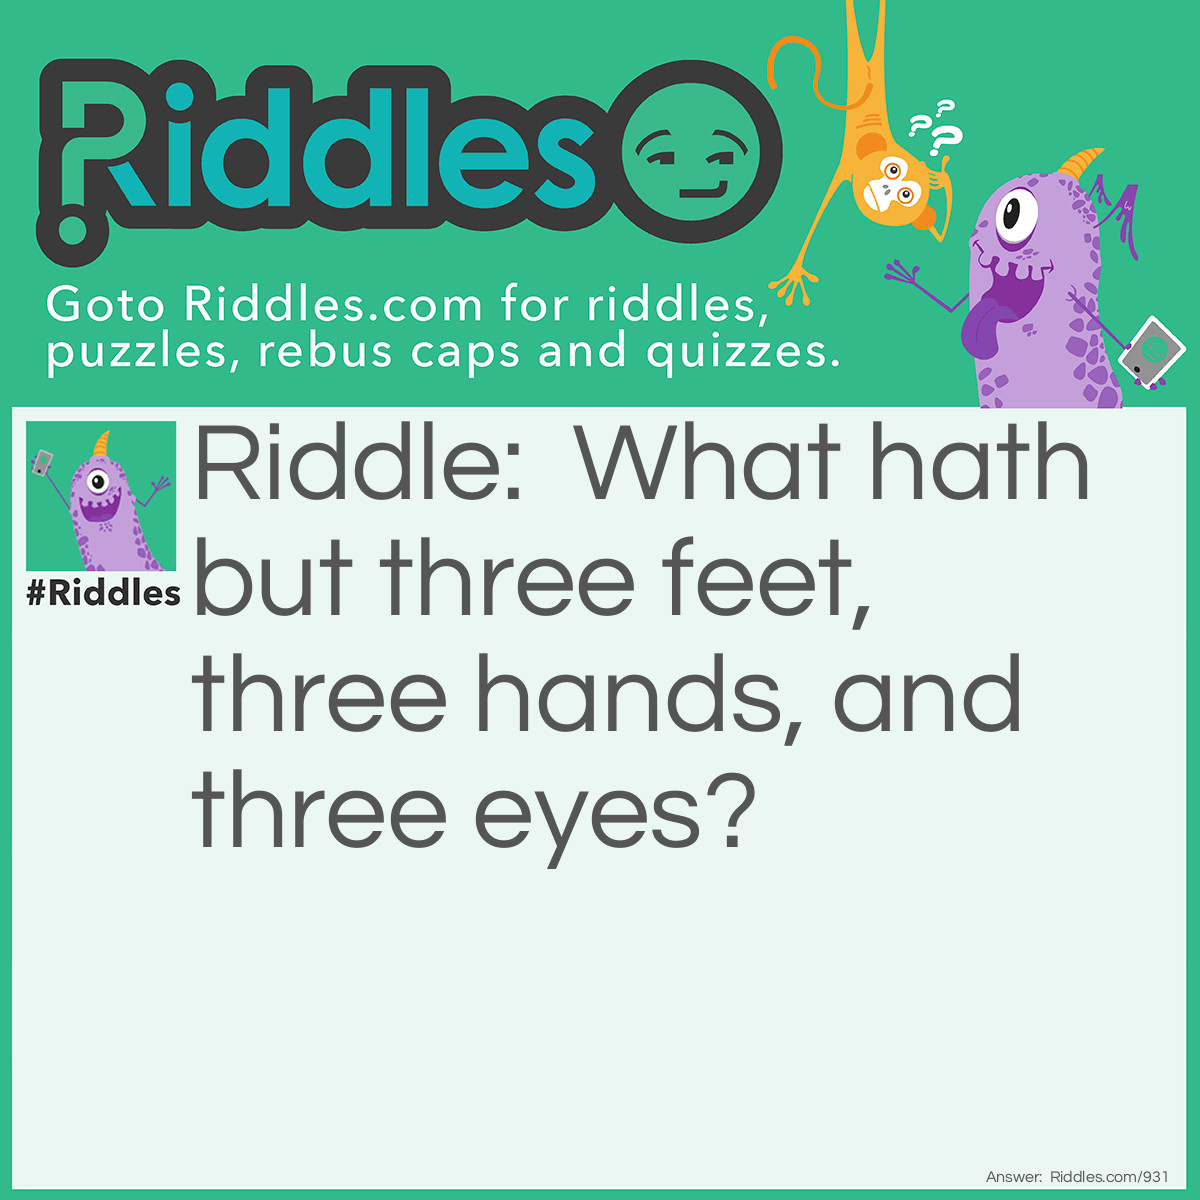 Riddle: What hath but three feet, three hands, and three eyes? Answer: Two pirates.